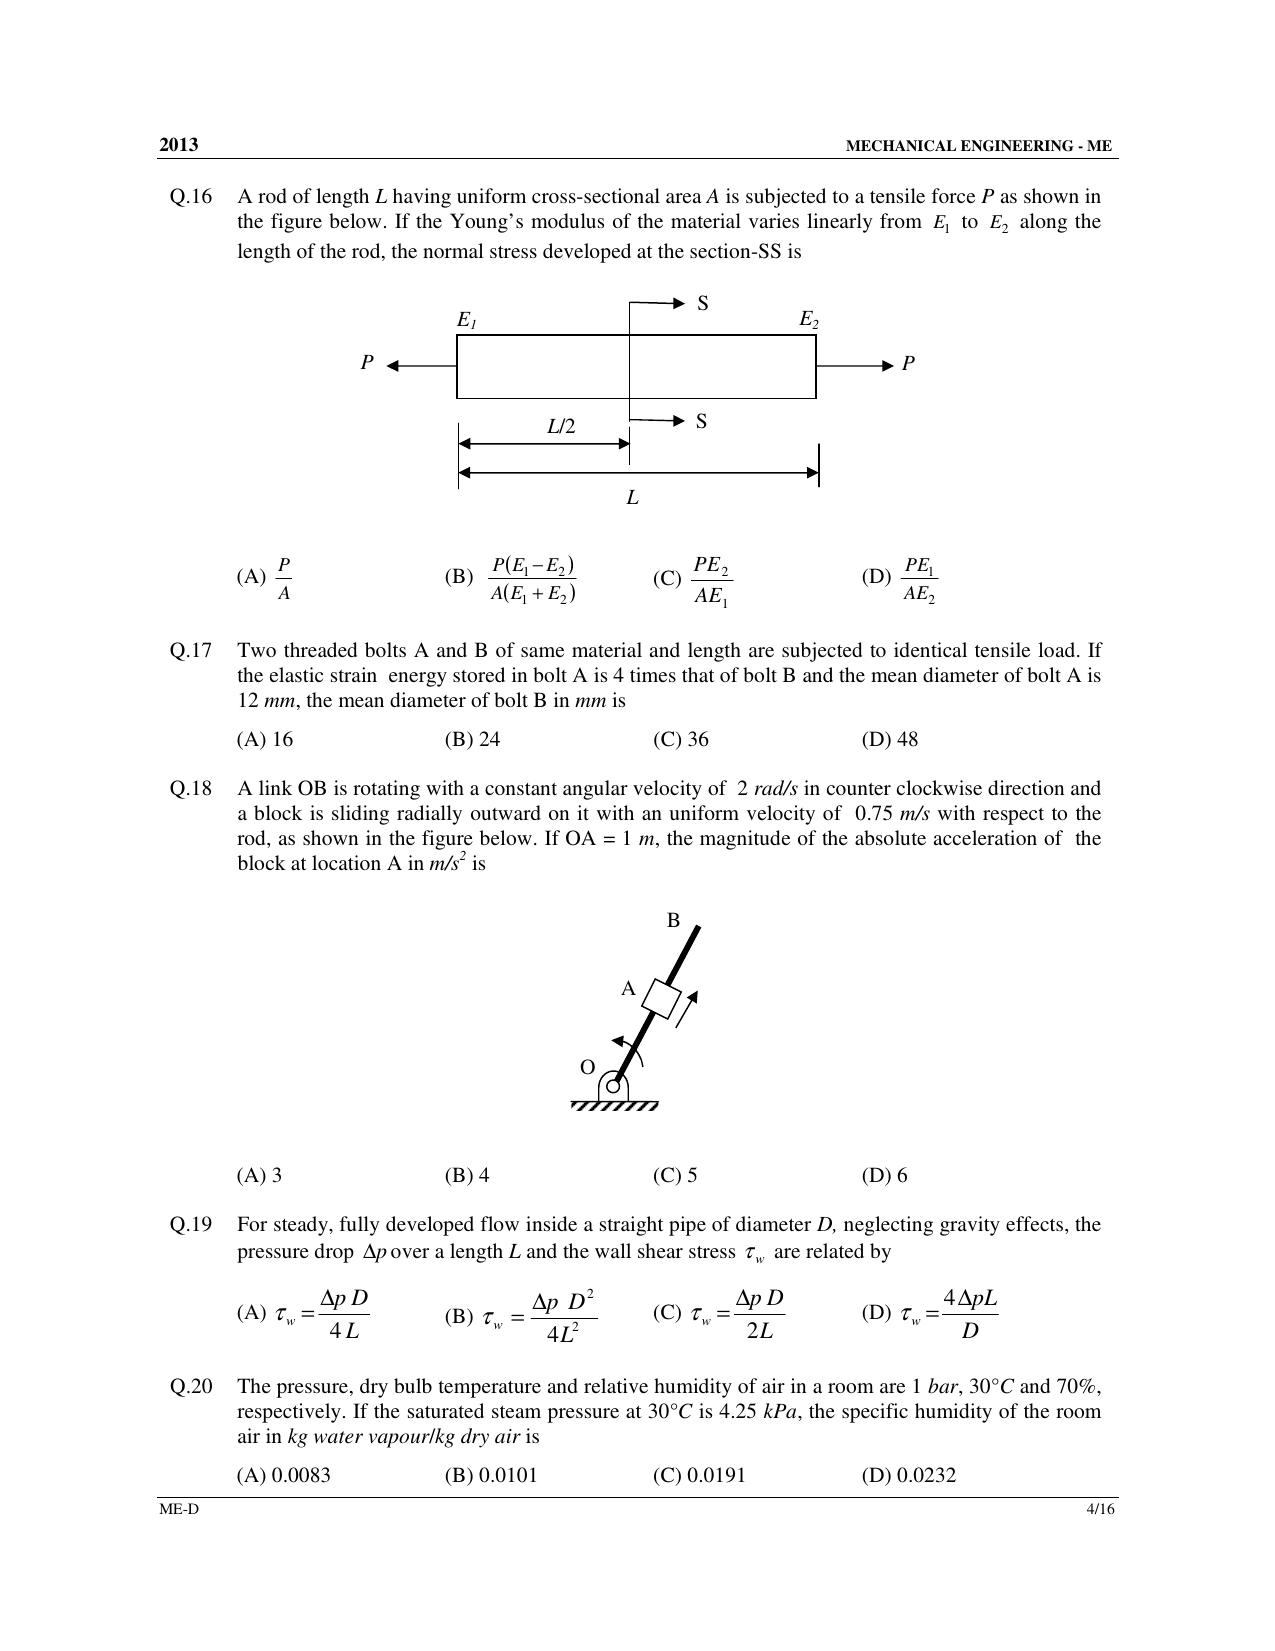 GATE 2013 Mechanical Engineering (ME) Question Paper with Answer Key - Page 47